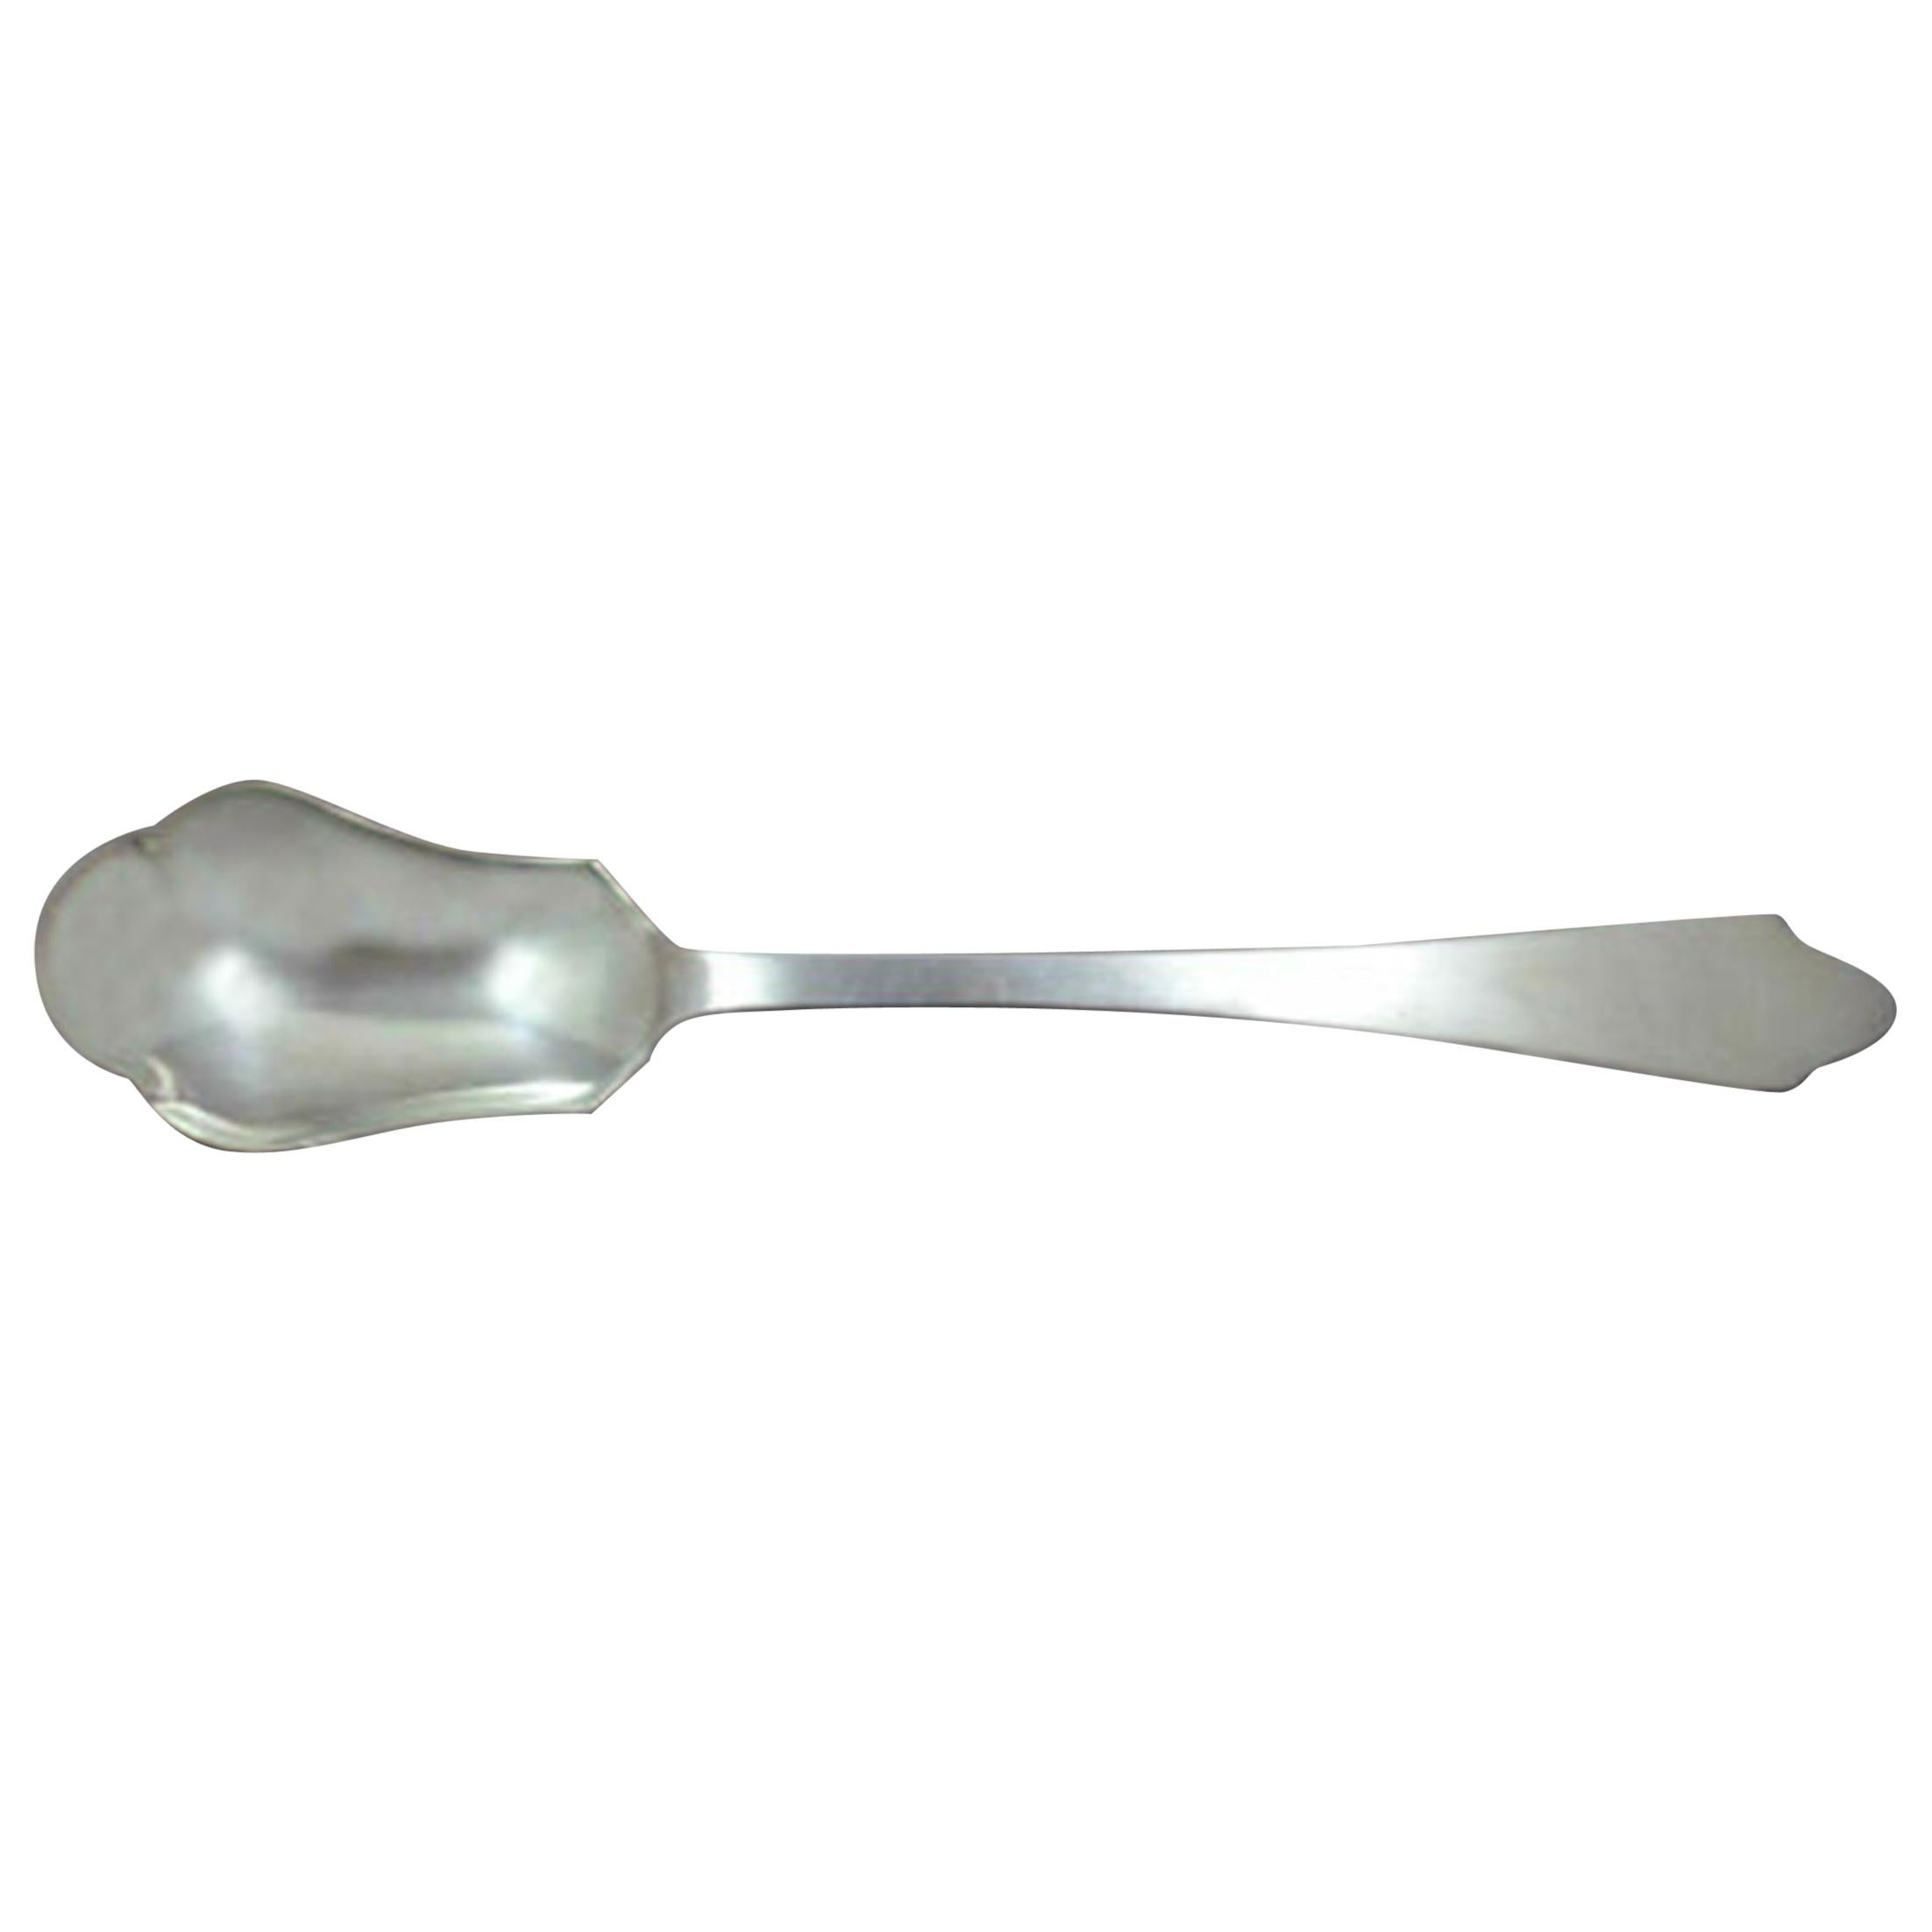 Southern Colonial by International Sterling Silver Relish Scoop Custom 5 1/2" 